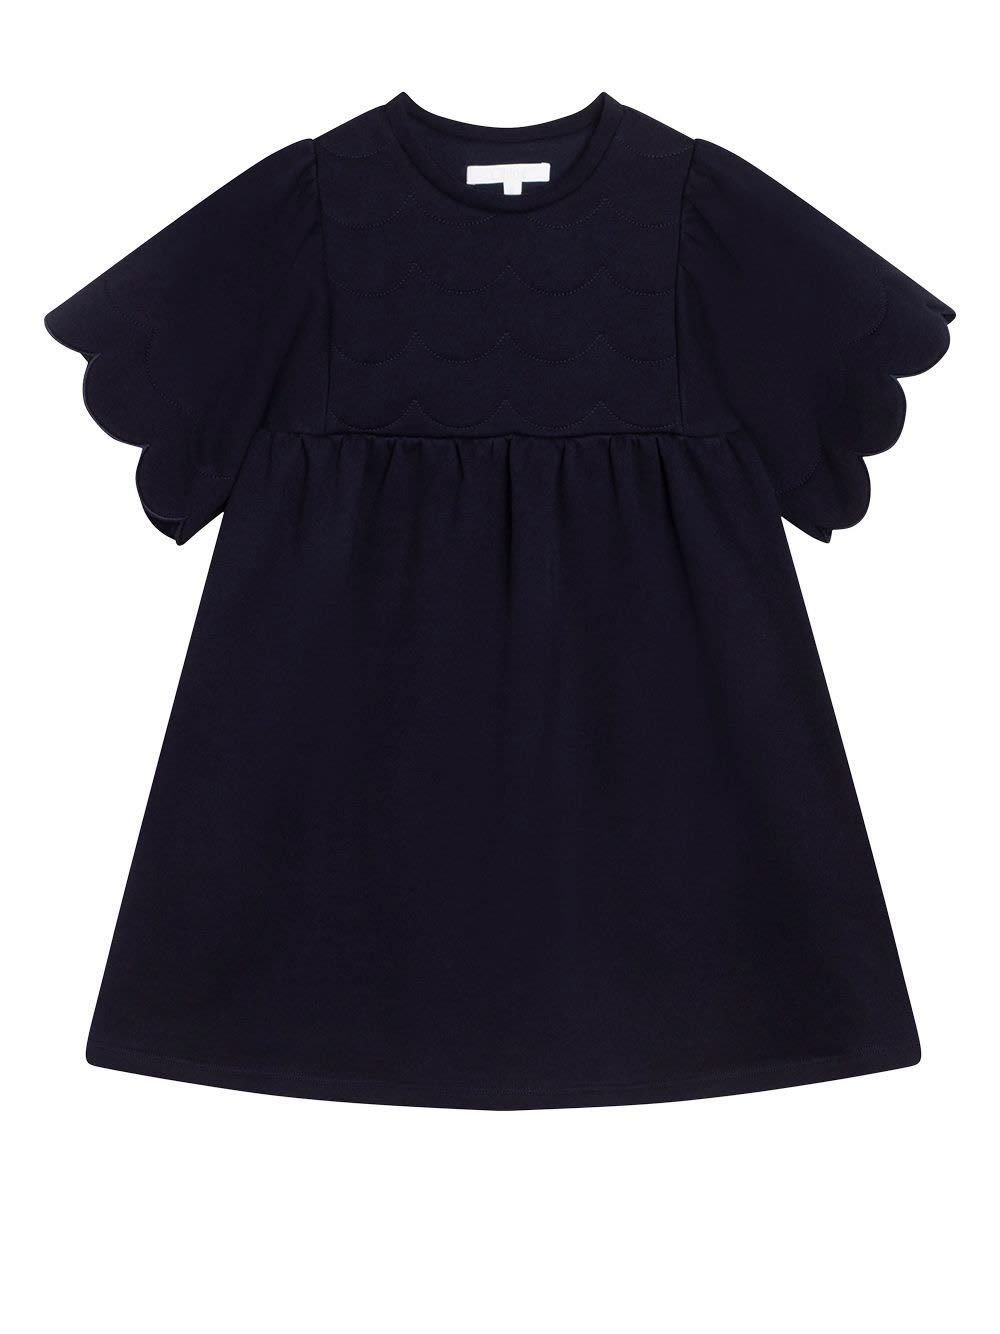 Chloé Kids Navy Blue Dress With Short Scalloped Sleeves